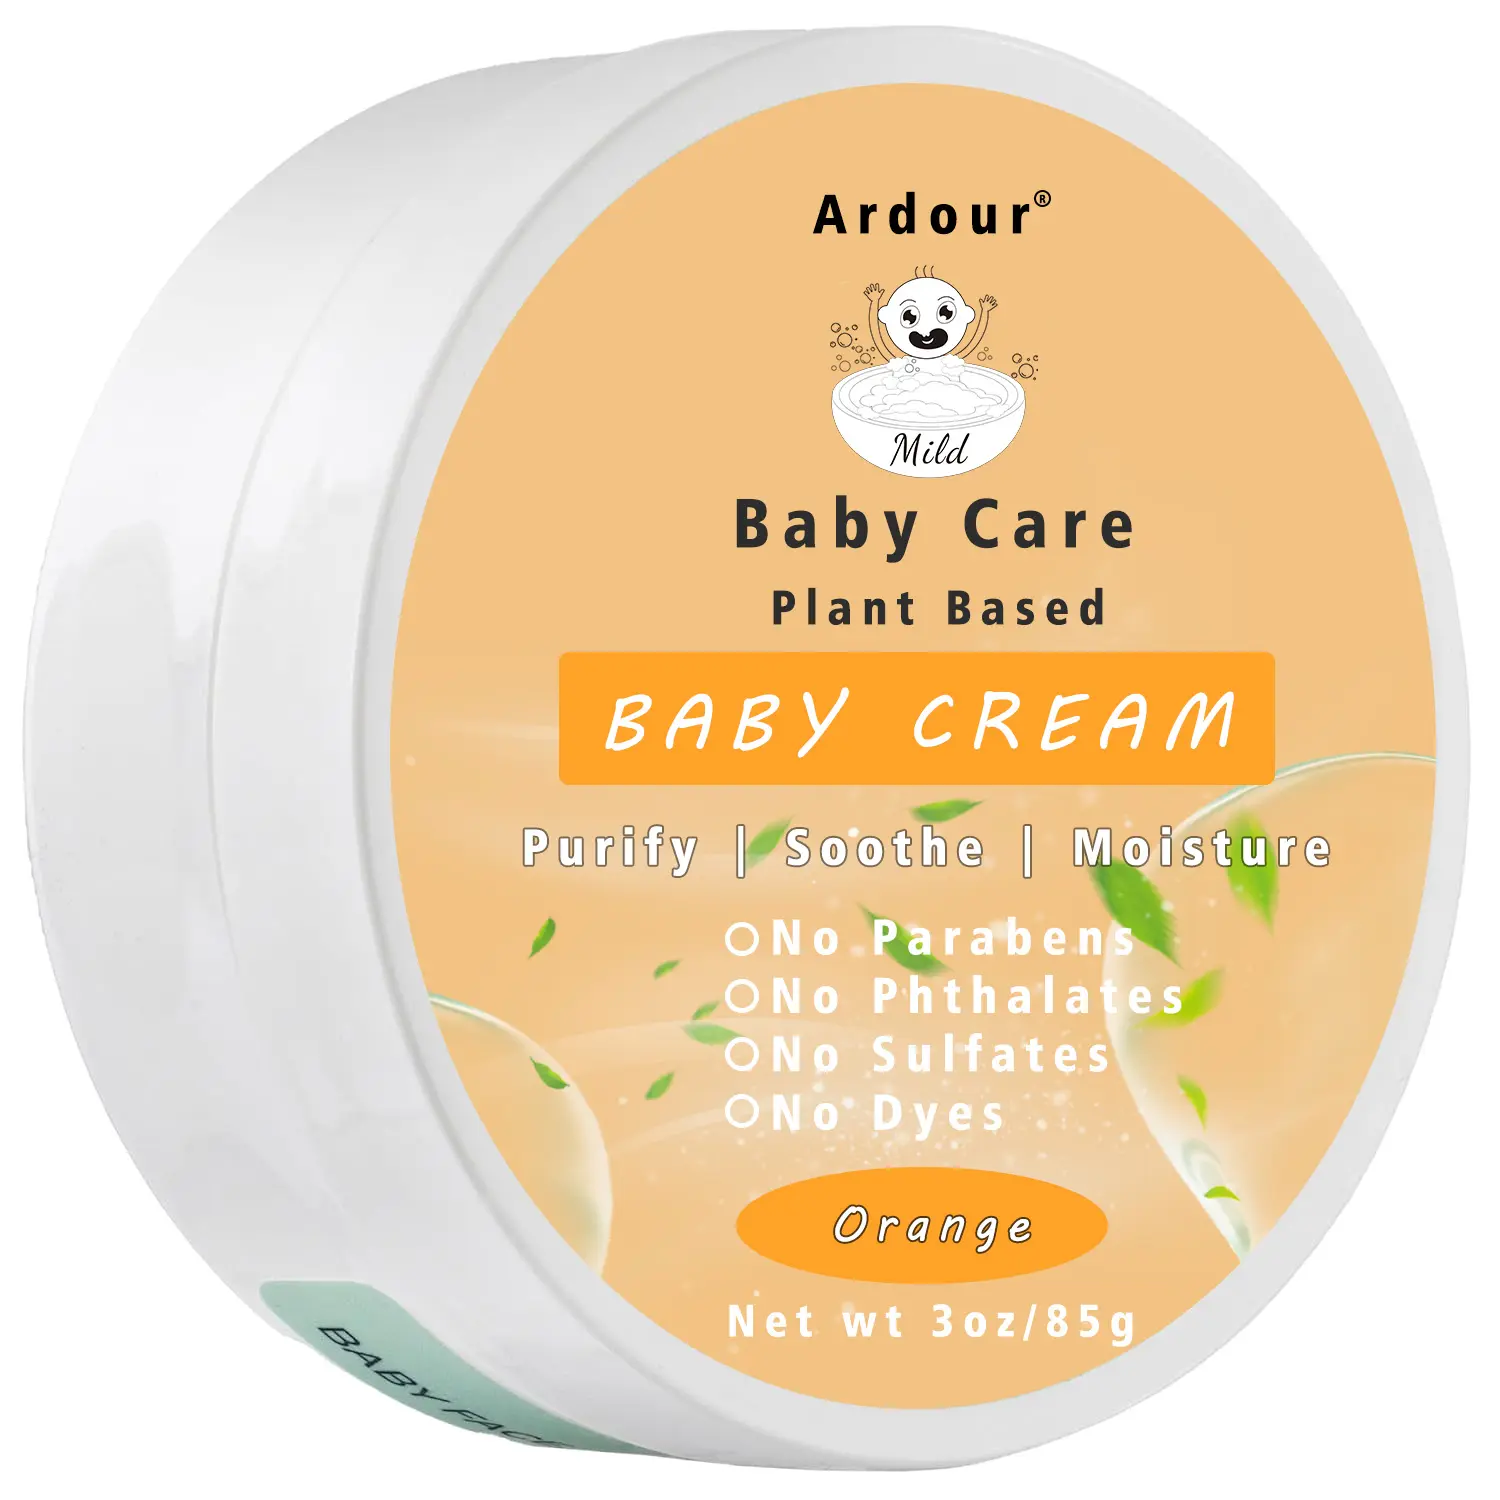 Orange Baby Cream Lotion For Babies Kids Children Newborn Infants Gentle For Baby Body And Face Skin Care Butter Balm